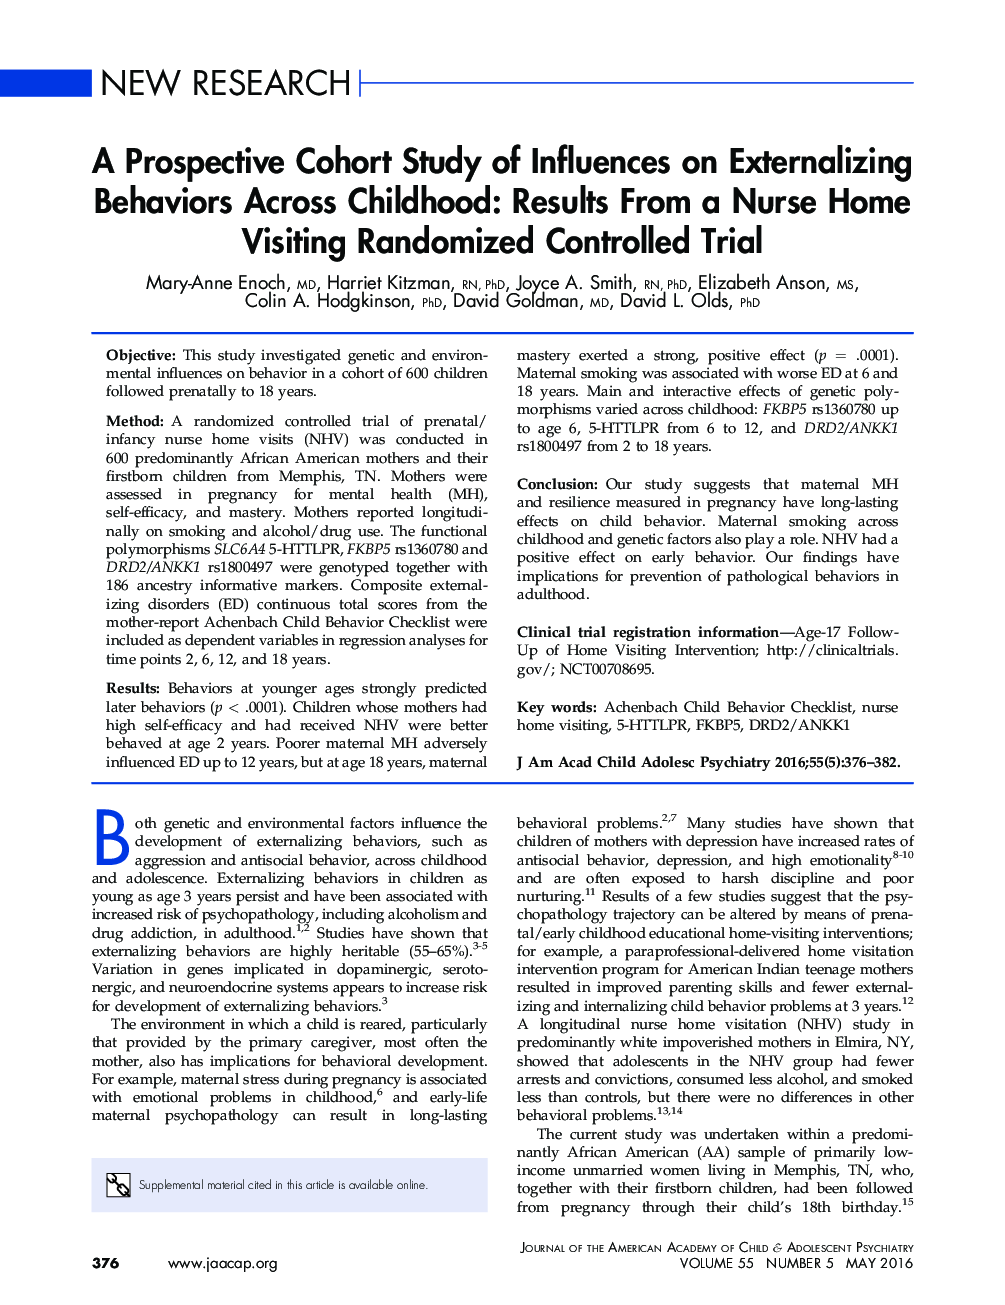 A Prospective Cohort Study of Influences on Externalizing Behaviors Across Childhood: Results From a Nurse Home Visiting Randomized Controlled Trial 